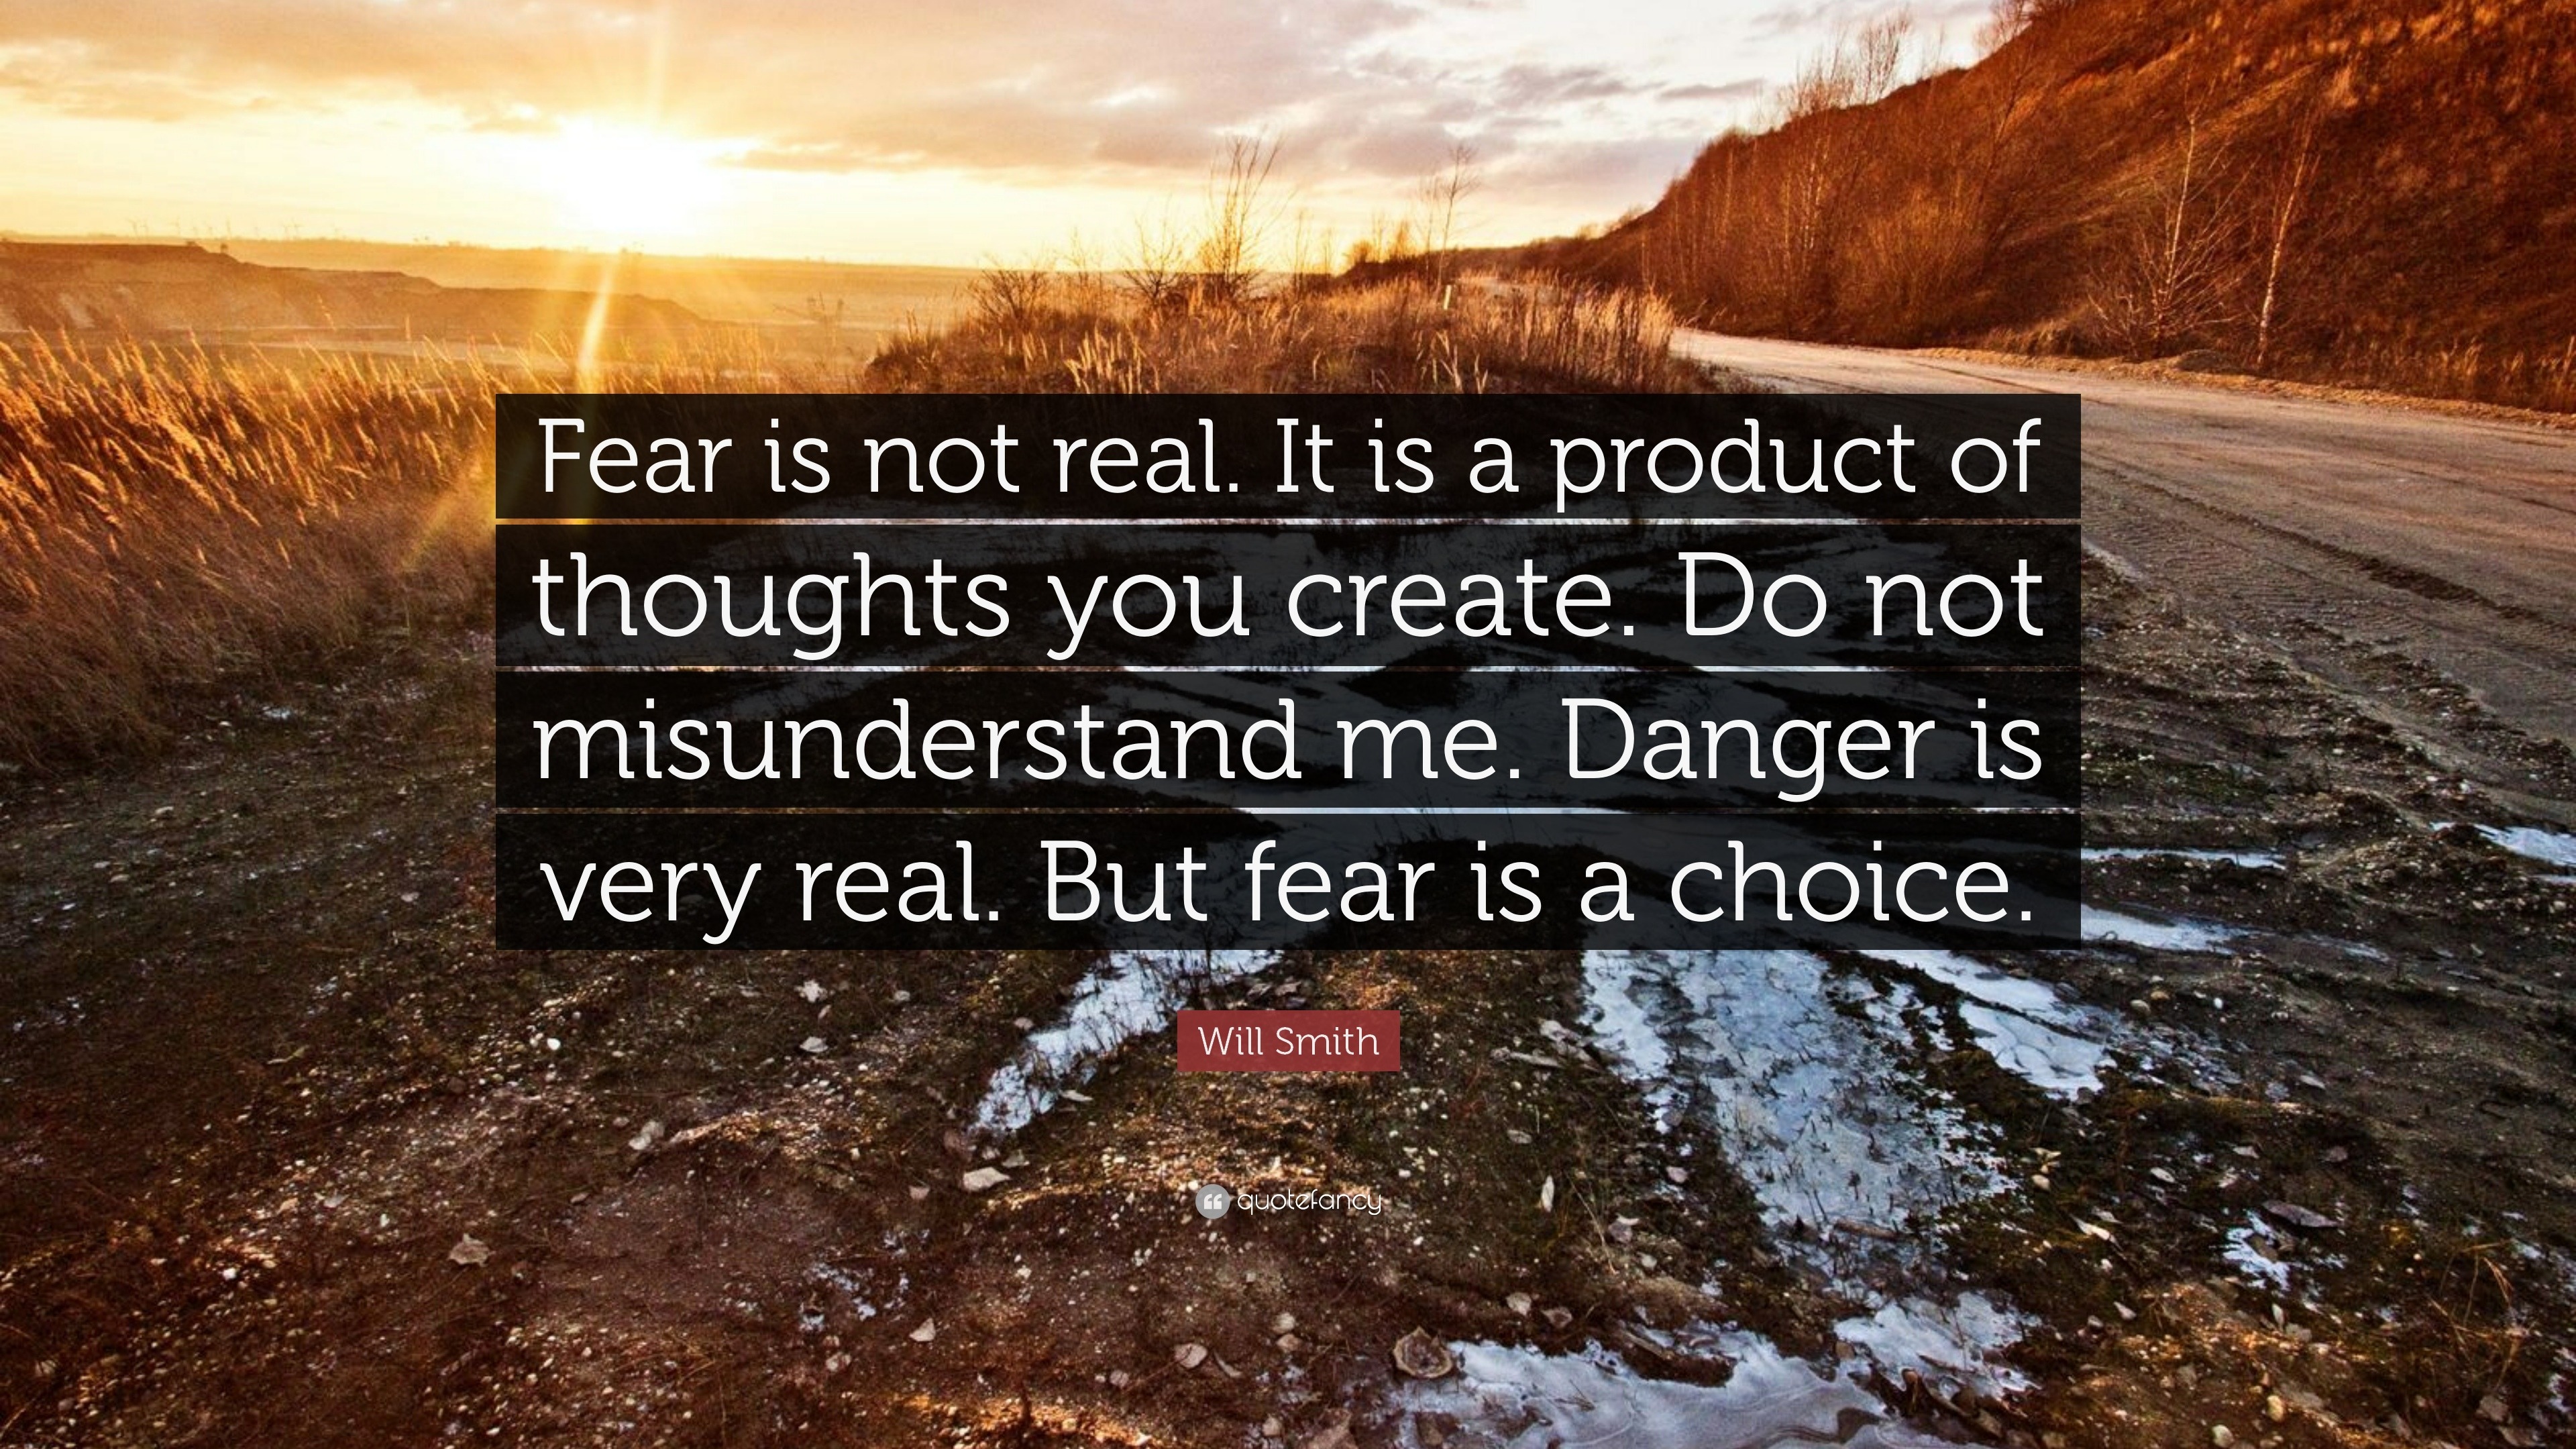 Will Smith Quote “Fear is not real. It is a product of